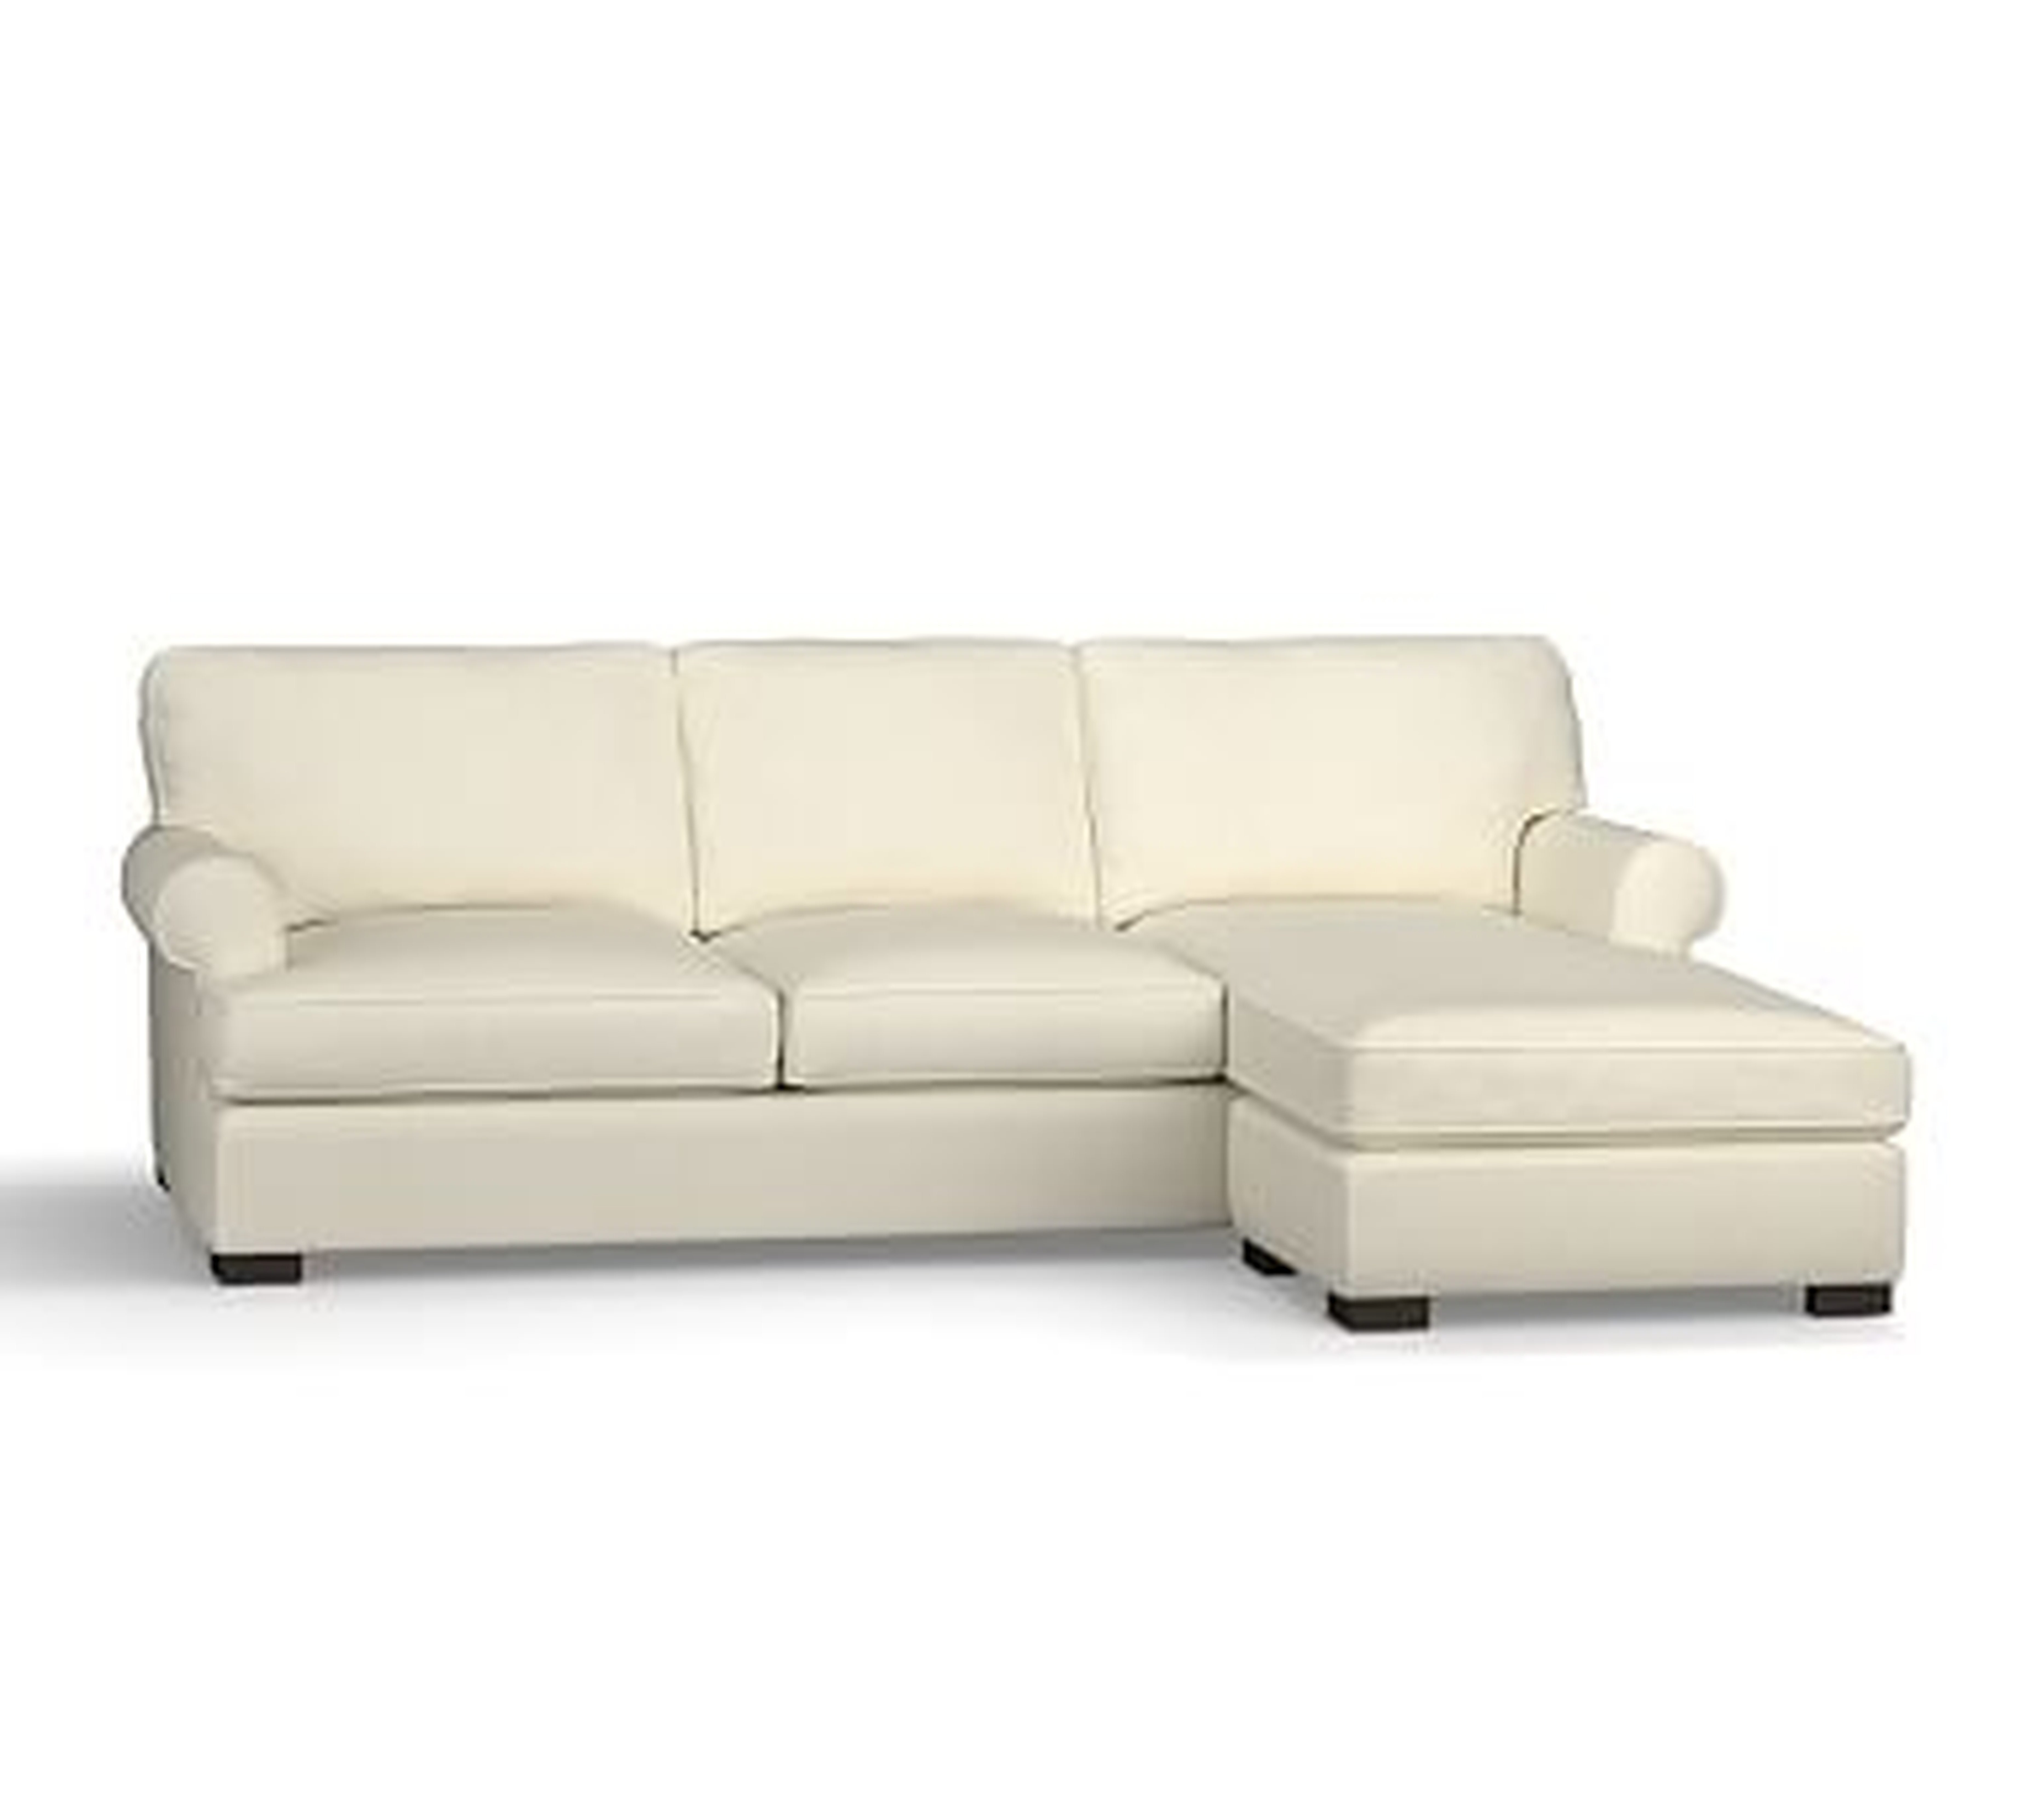 Townsend Roll Arm Upholstered Sofa with Reversible Storage Chaise Sectional, Polyester Wrapped Cushions, Premium Performance Basketweave Ivory - Pottery Barn